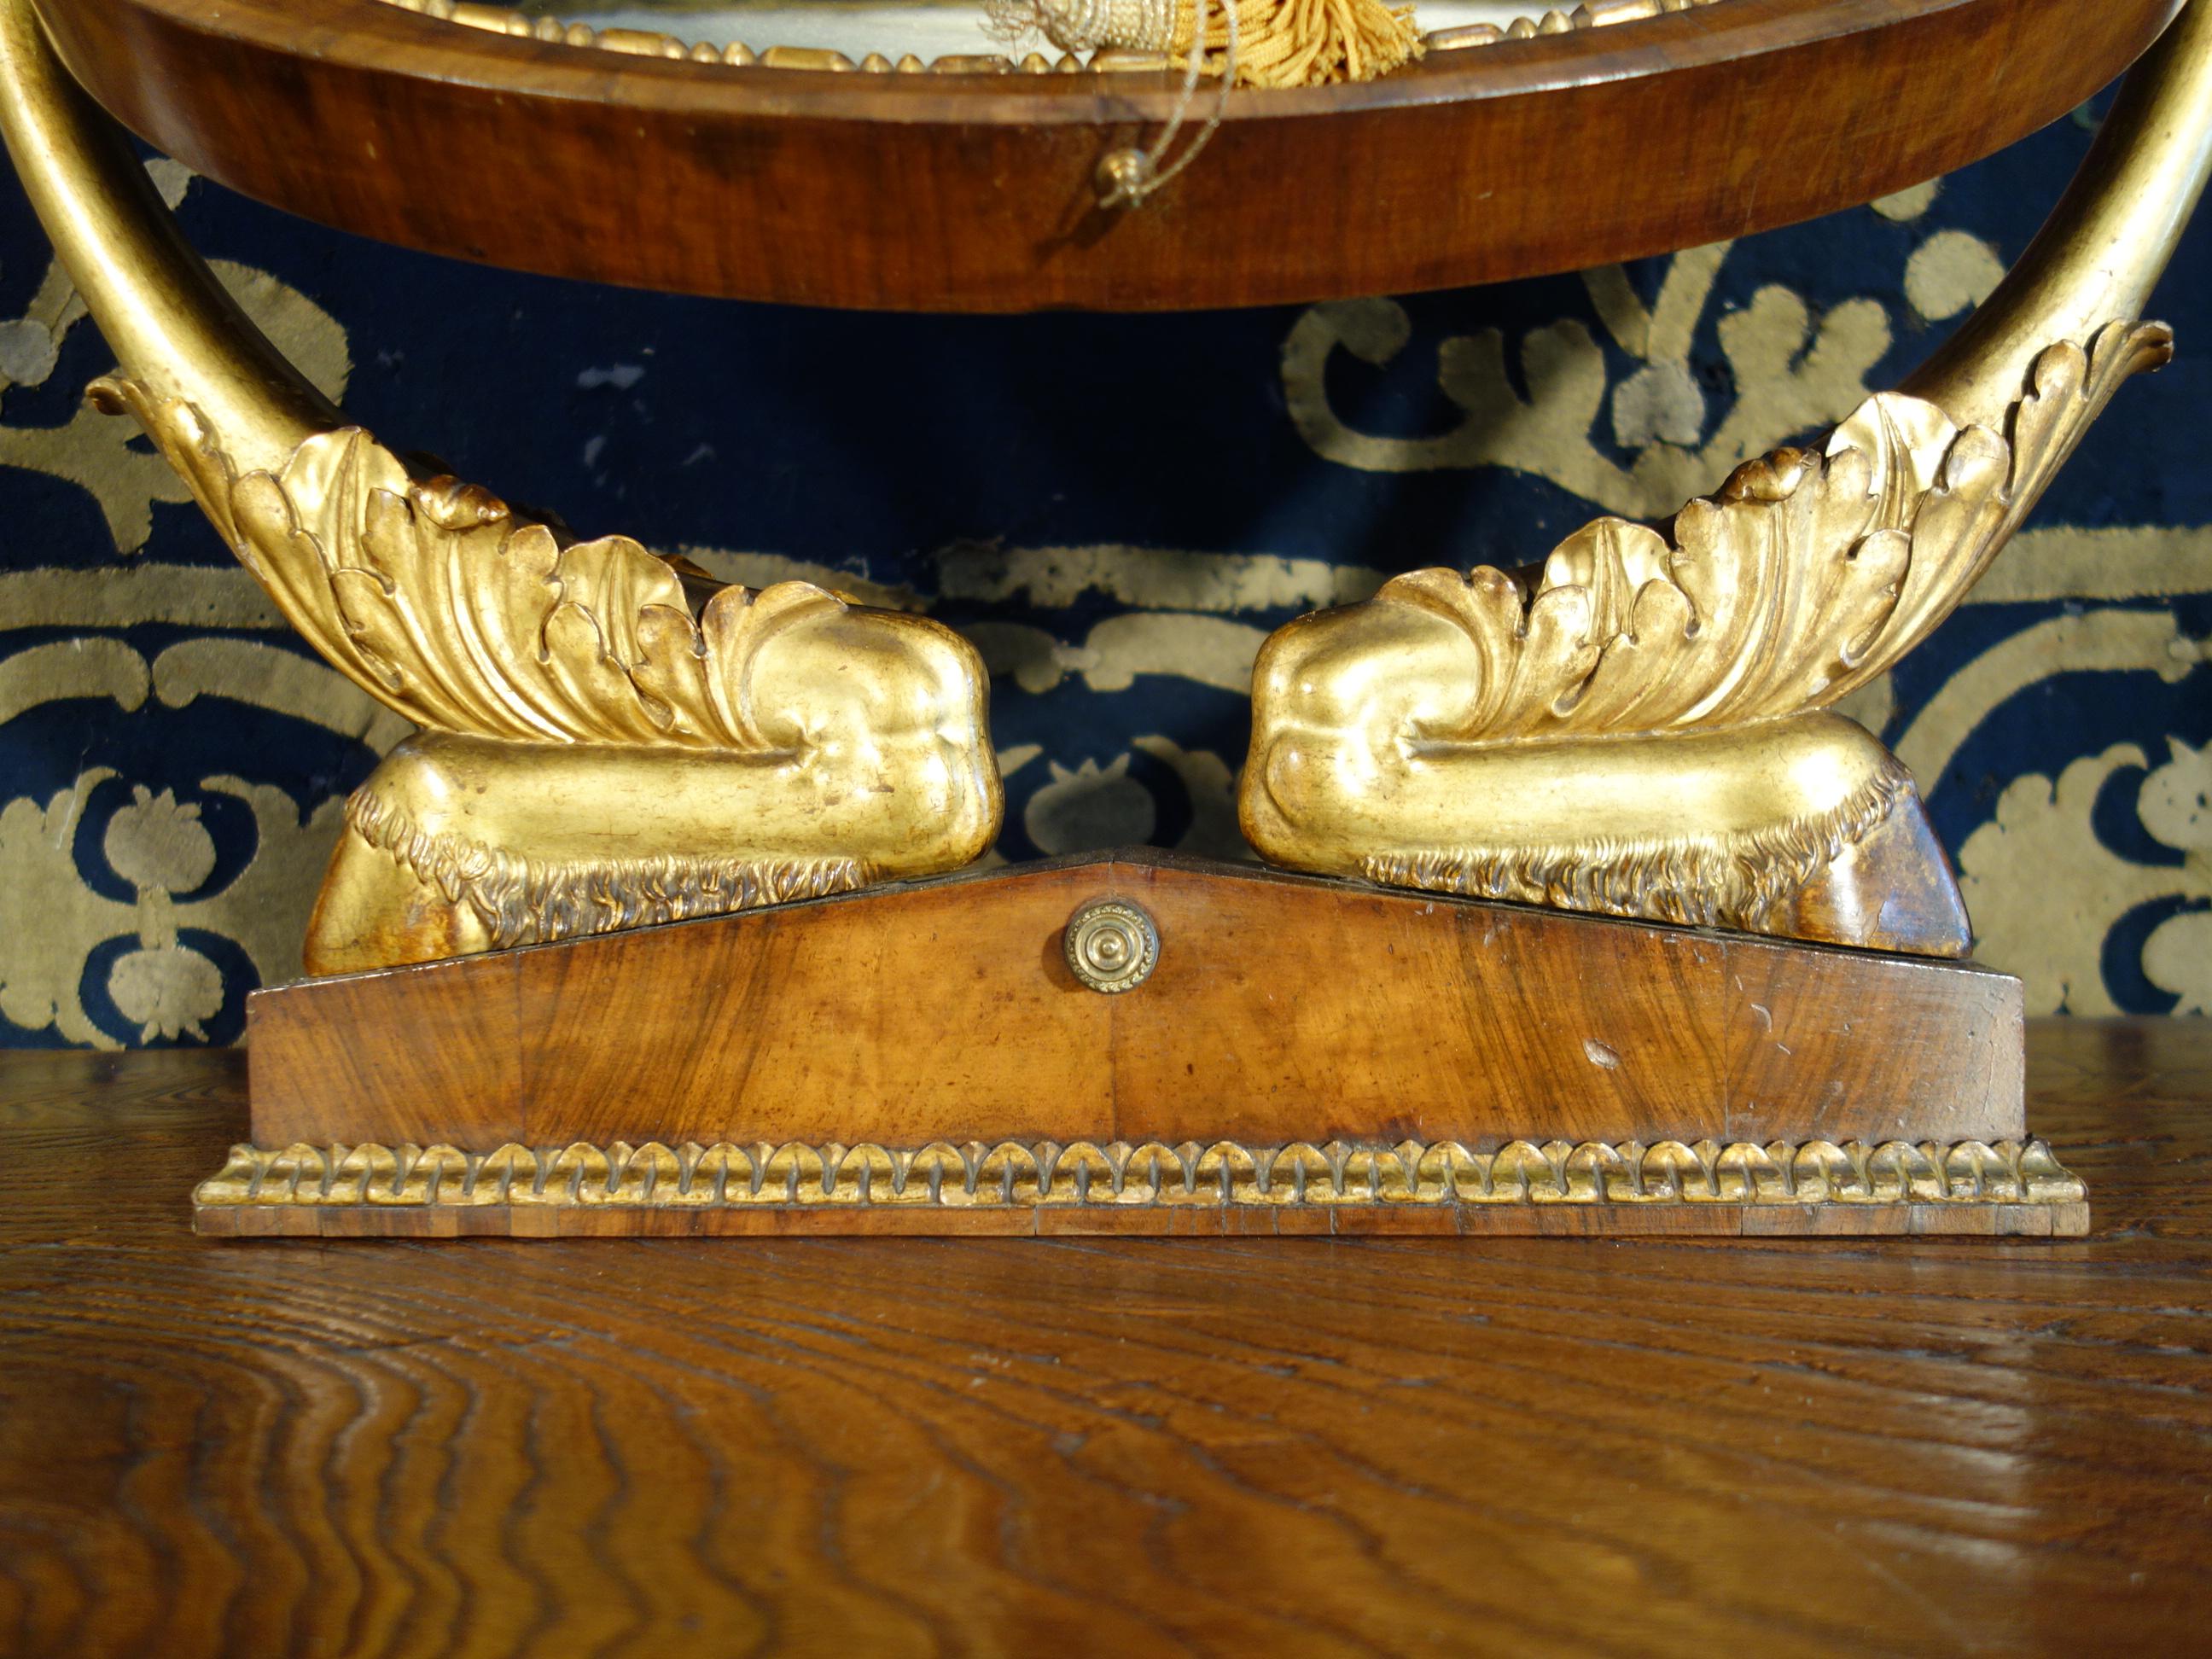 Italian Empire Walnut Psyche Table Mirror with Gold Gilt Swans and Ebony Inlay For Sale 6